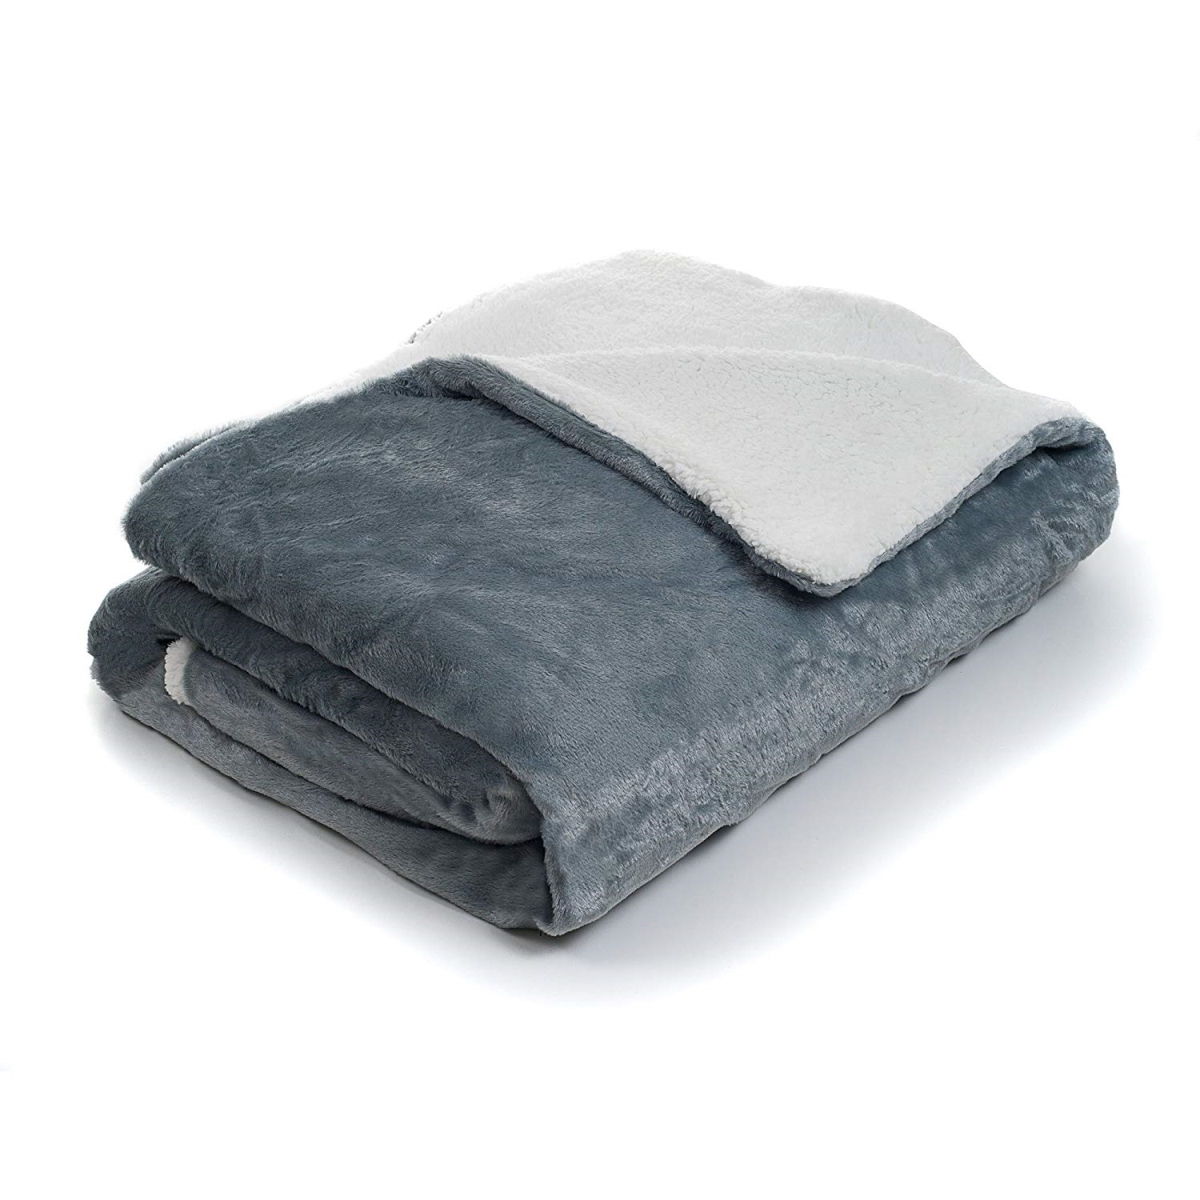 61a-06516 Fleece Blanket With Sherpa Backing, Full & Queen Size - Grey